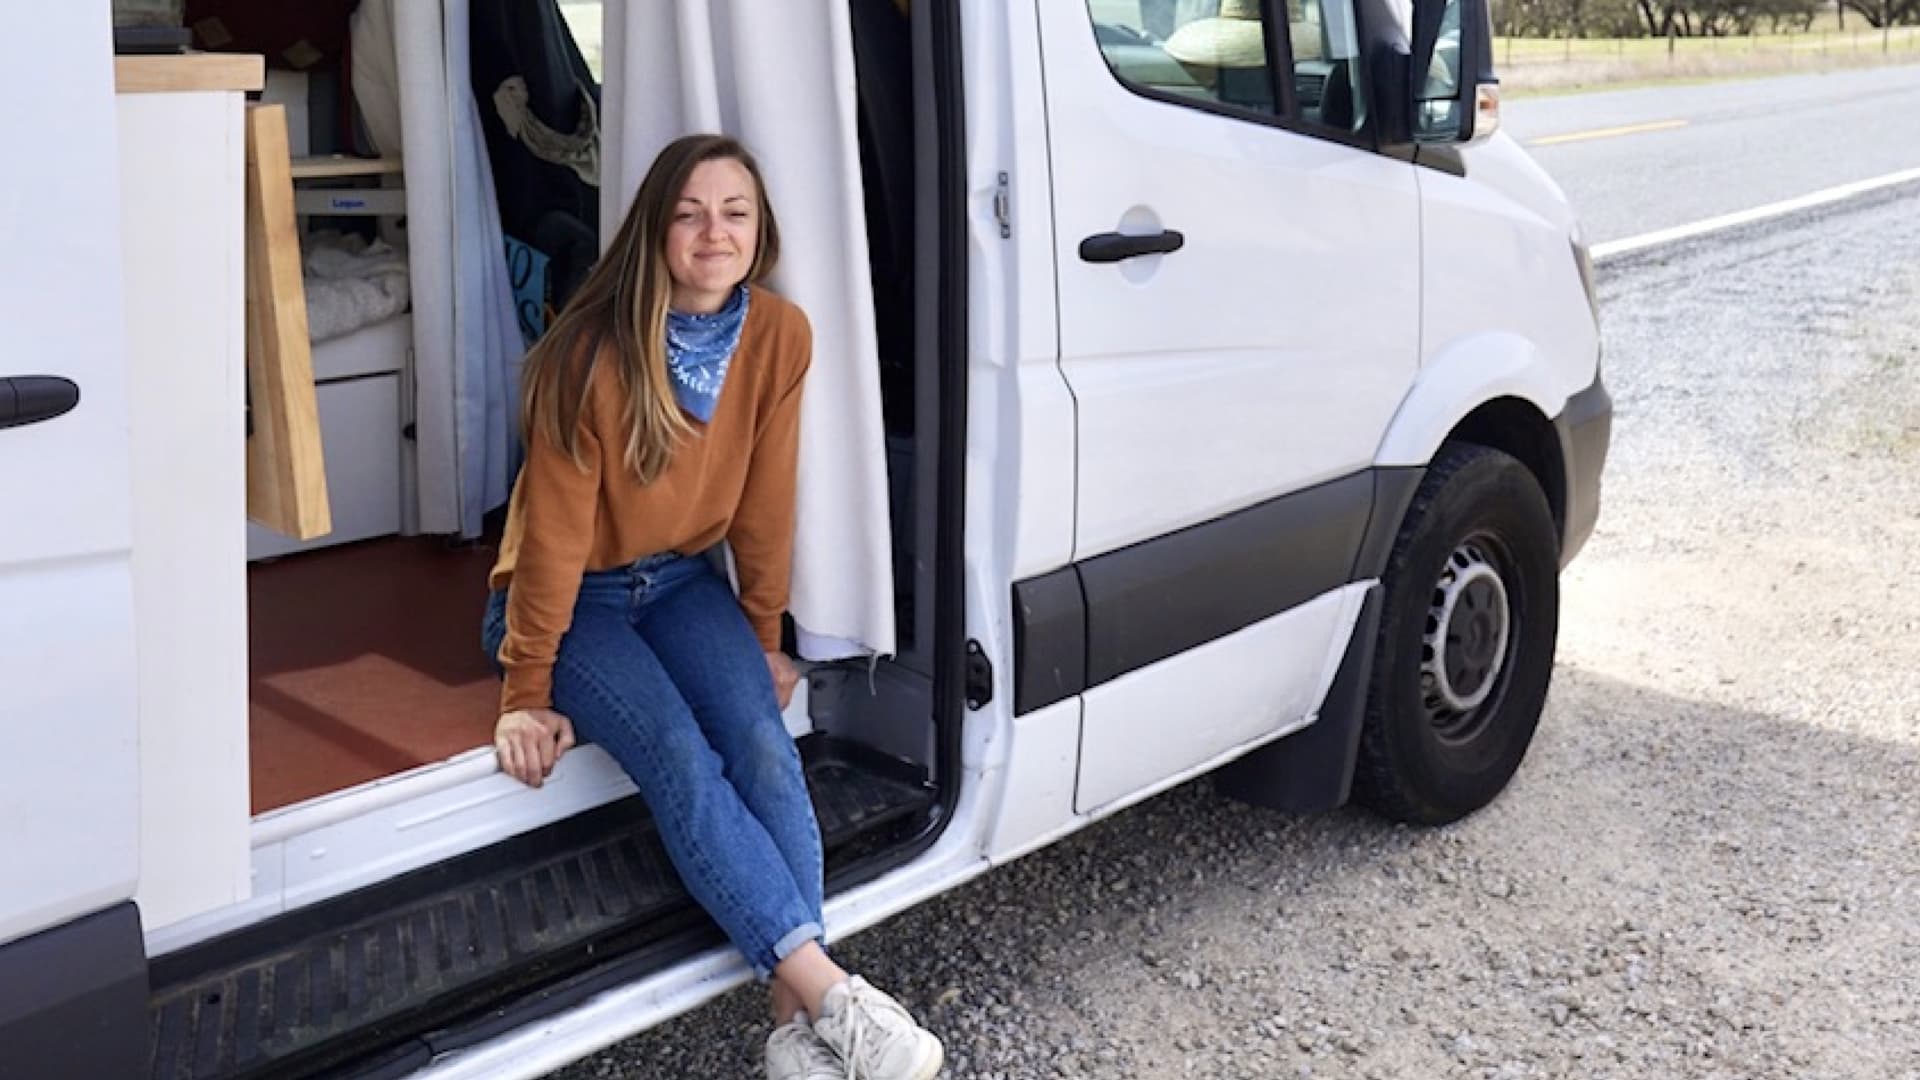 When Erica Horn received a work email in May 2020 saying her company would be fully remote for the next year, she knew right away it was time to live out her long-held dream of living out of a van.